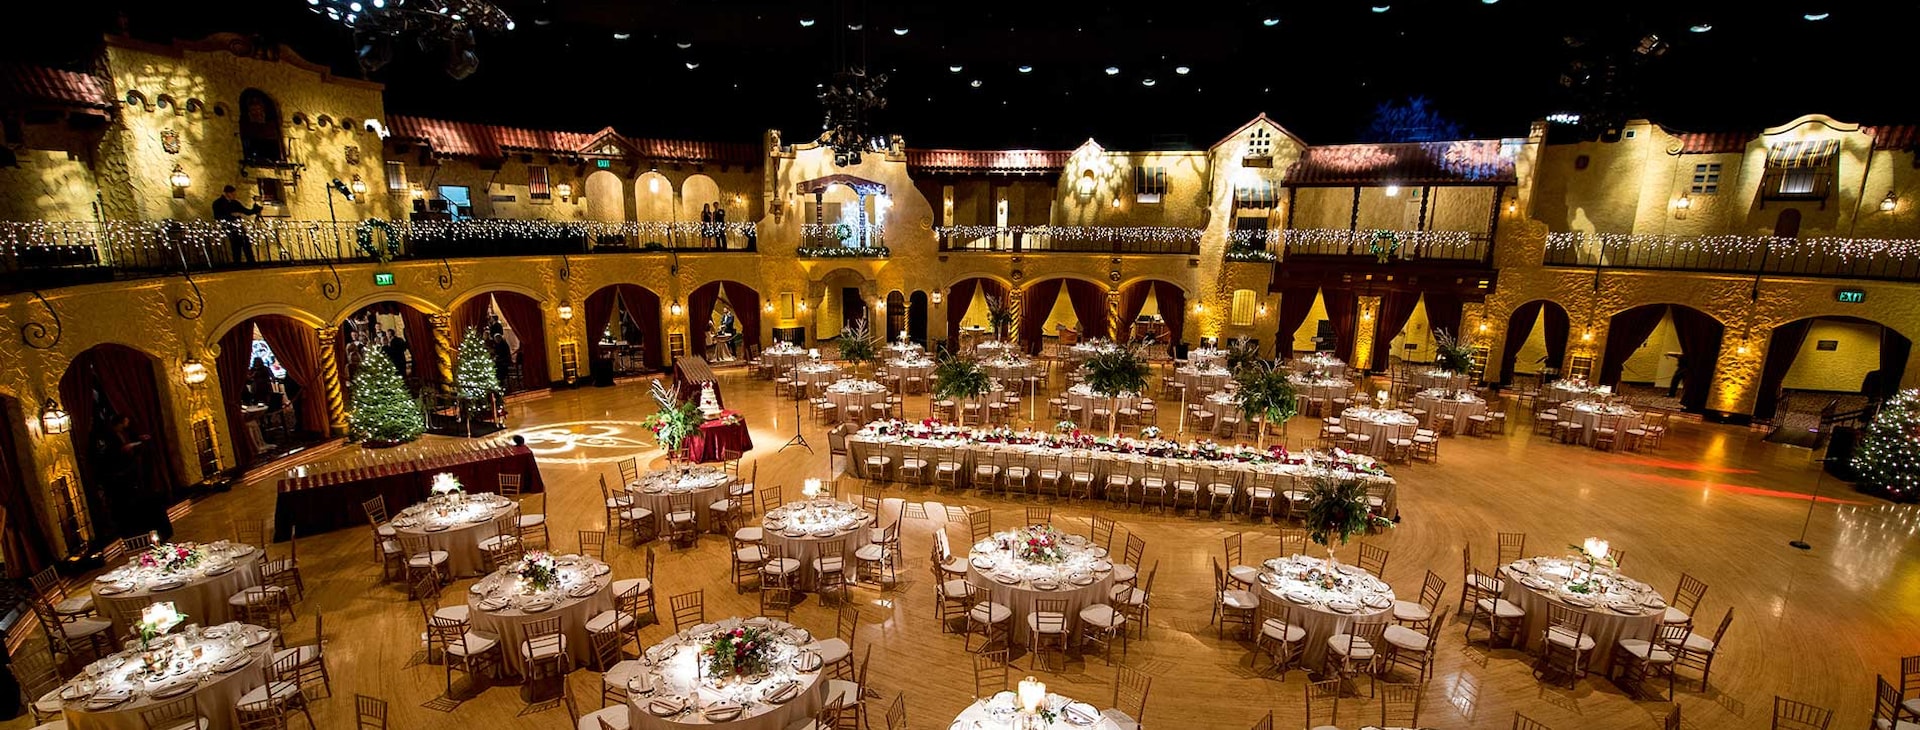 Indiana Roof Ballroom Venue hosting a Wedding by Crystal Catering